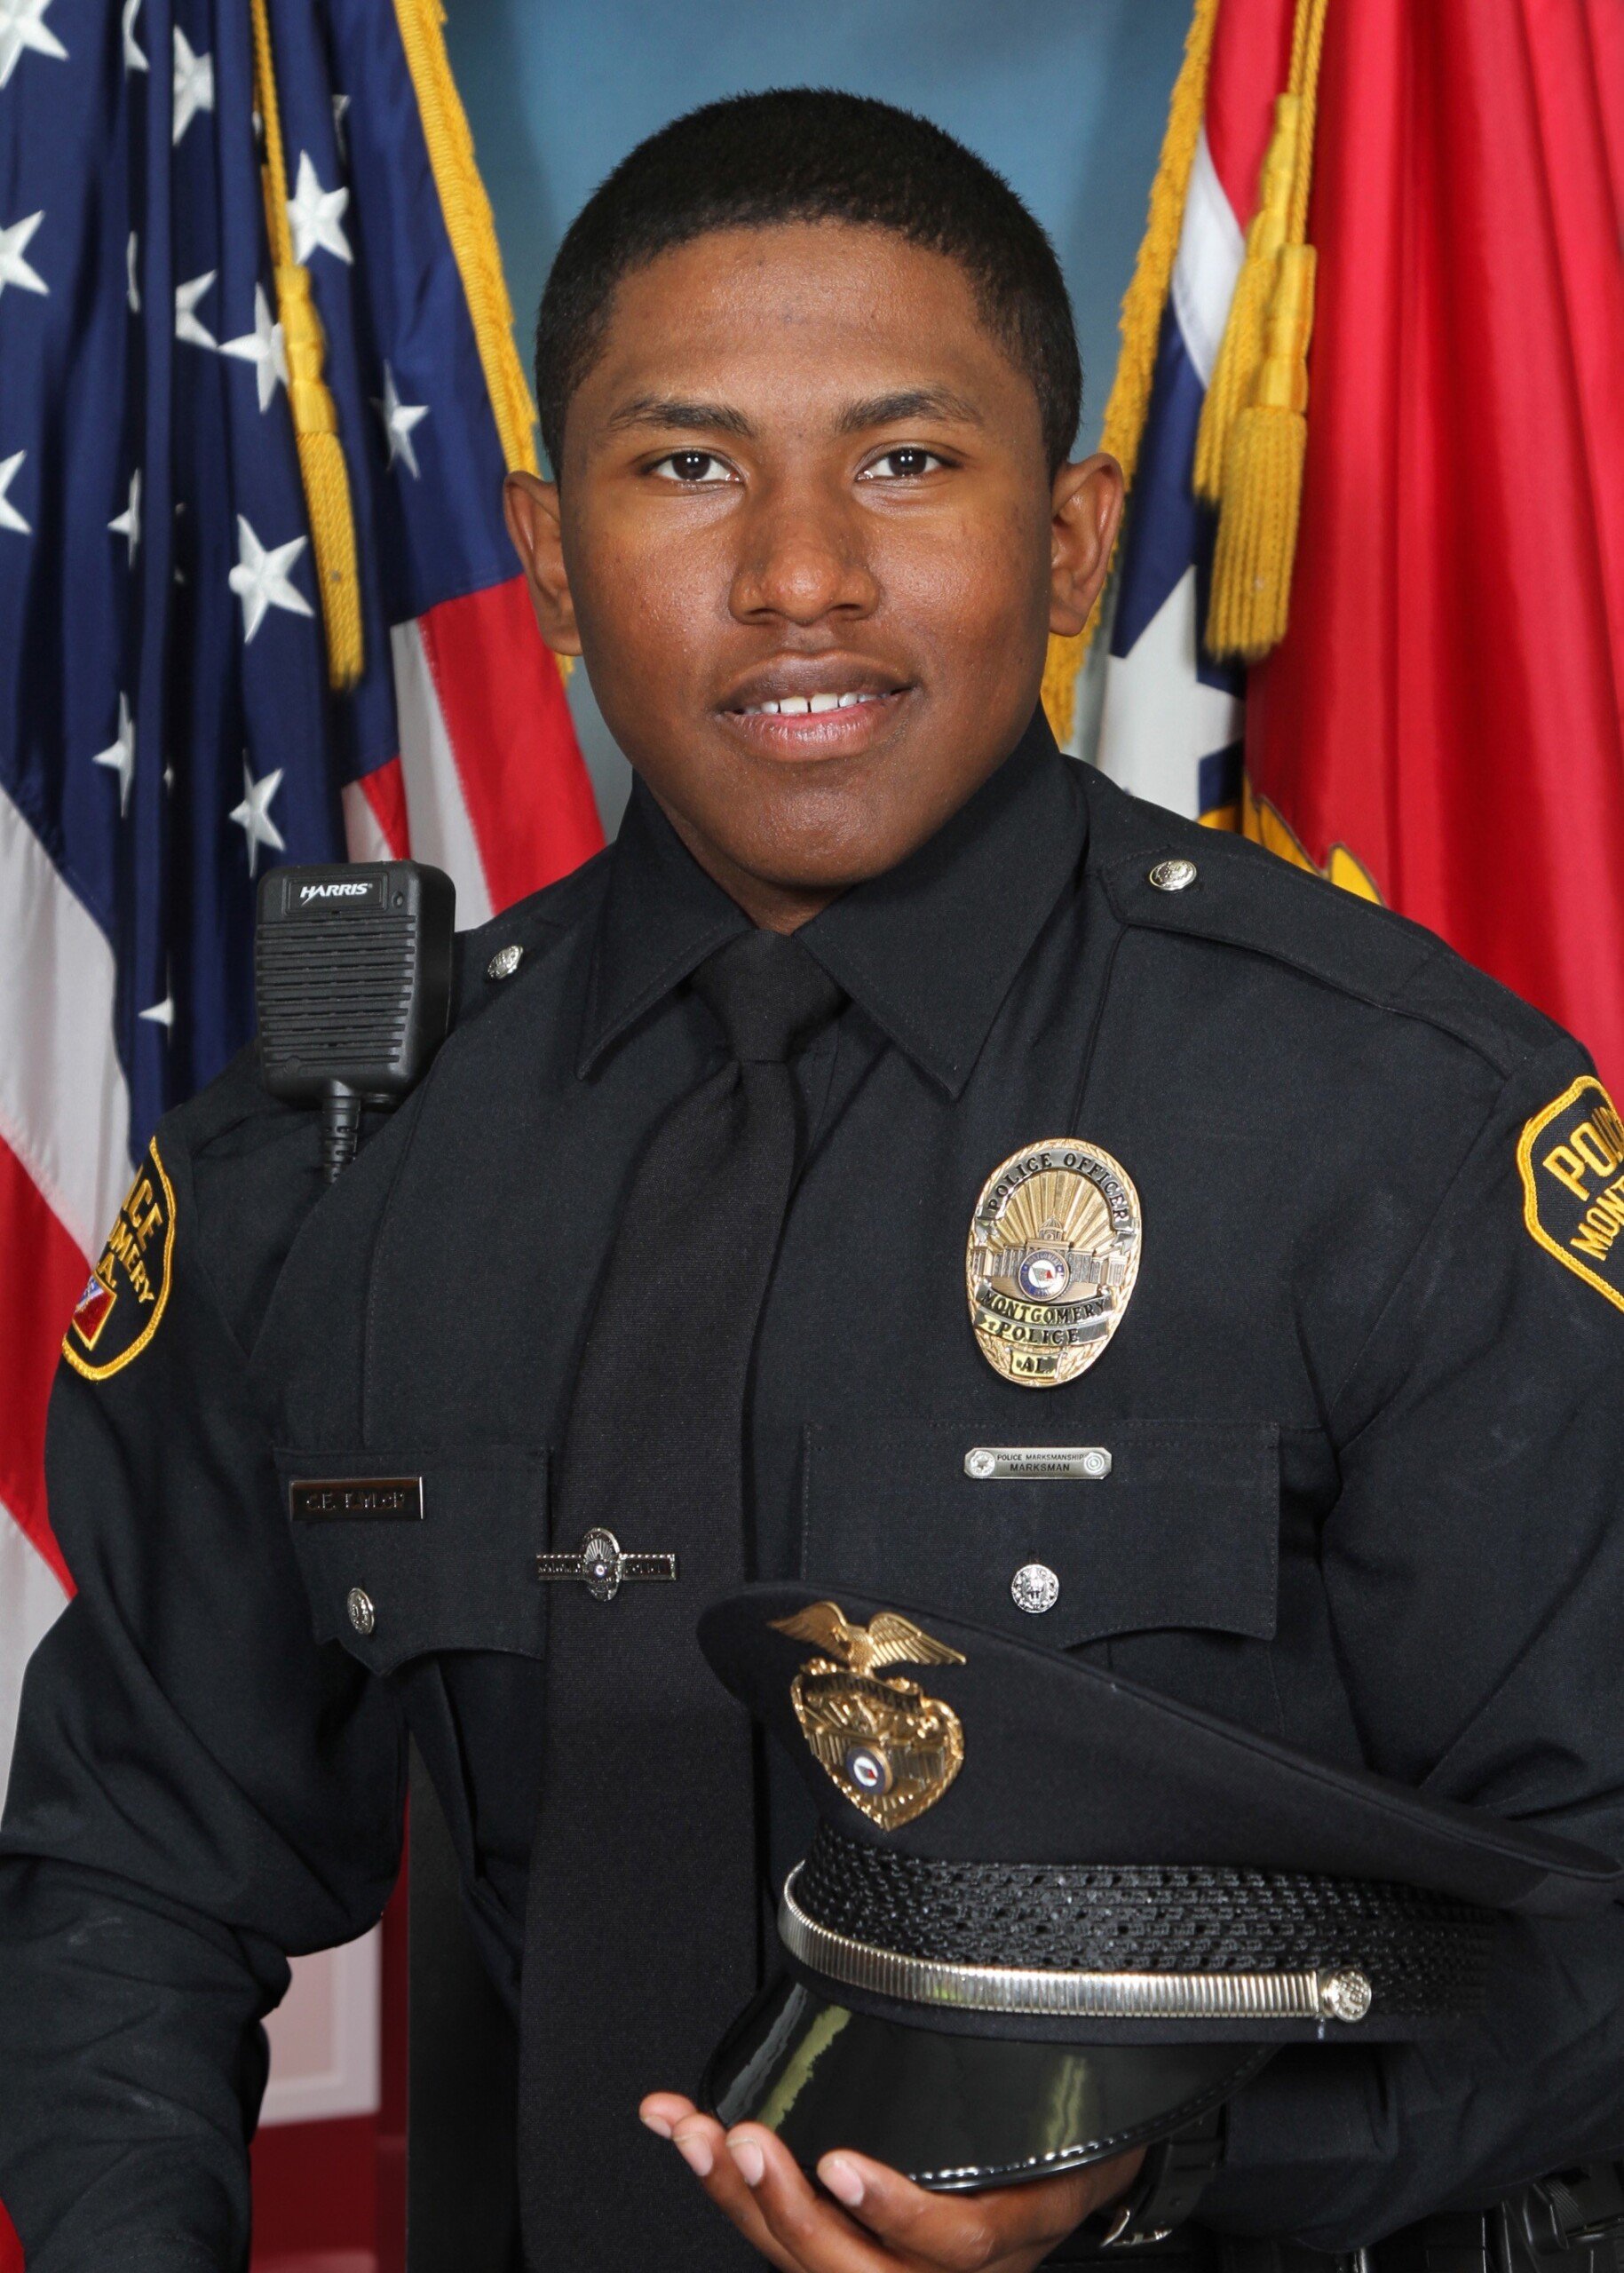 Funeral arrangements announced for police officer Carlos Taylor WAKA 8